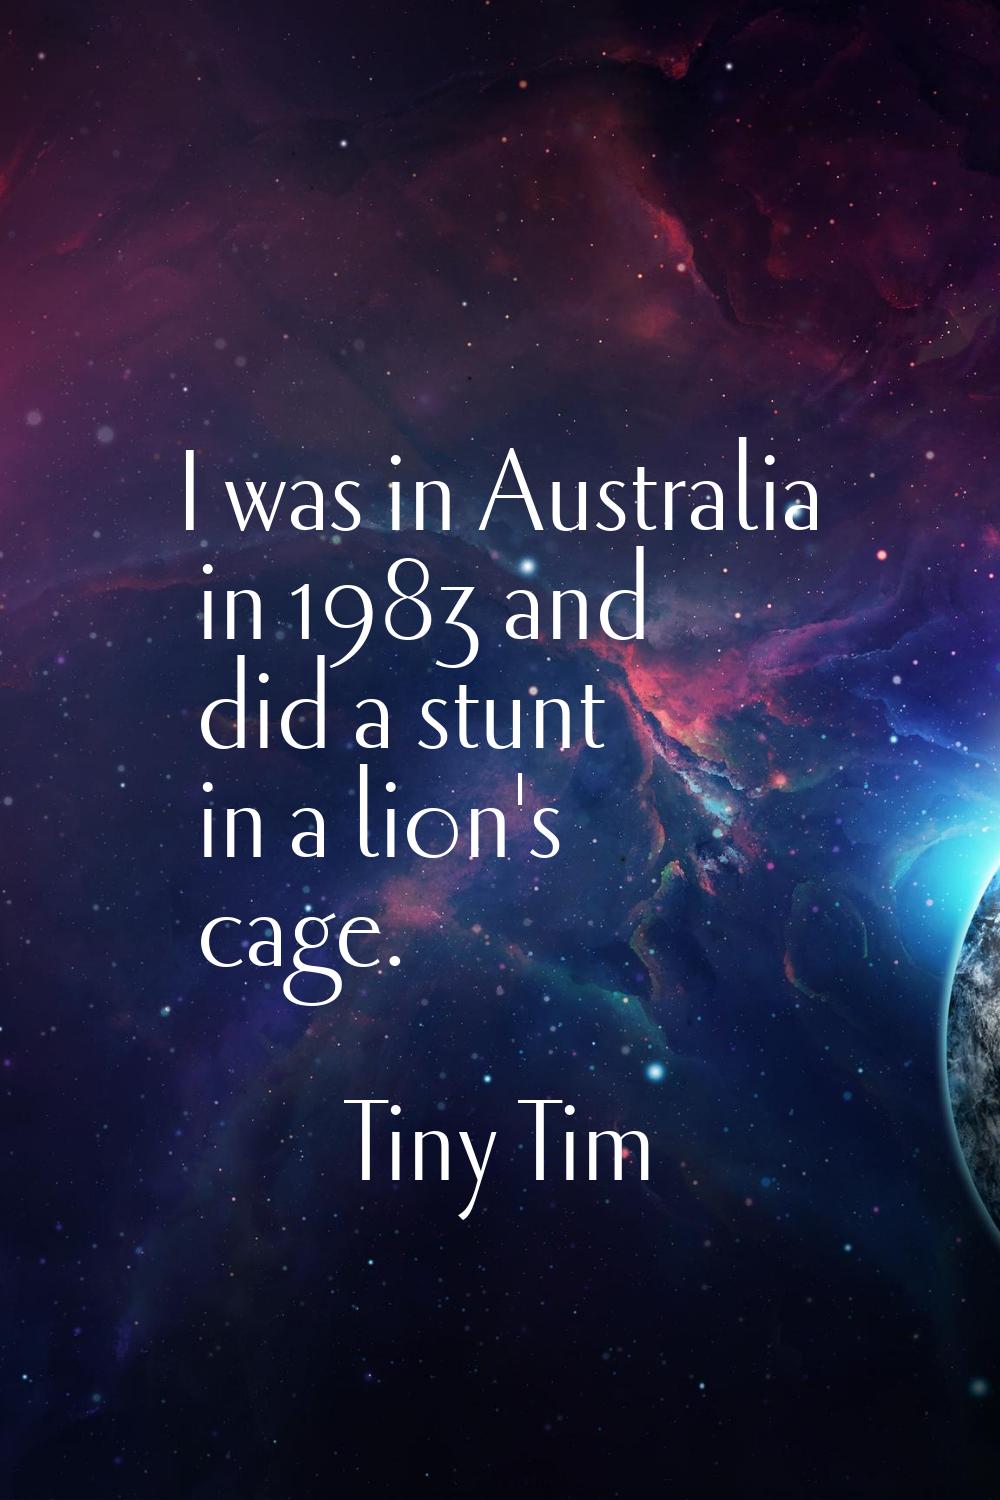 I was in Australia in 1983 and did a stunt in a lion's cage.